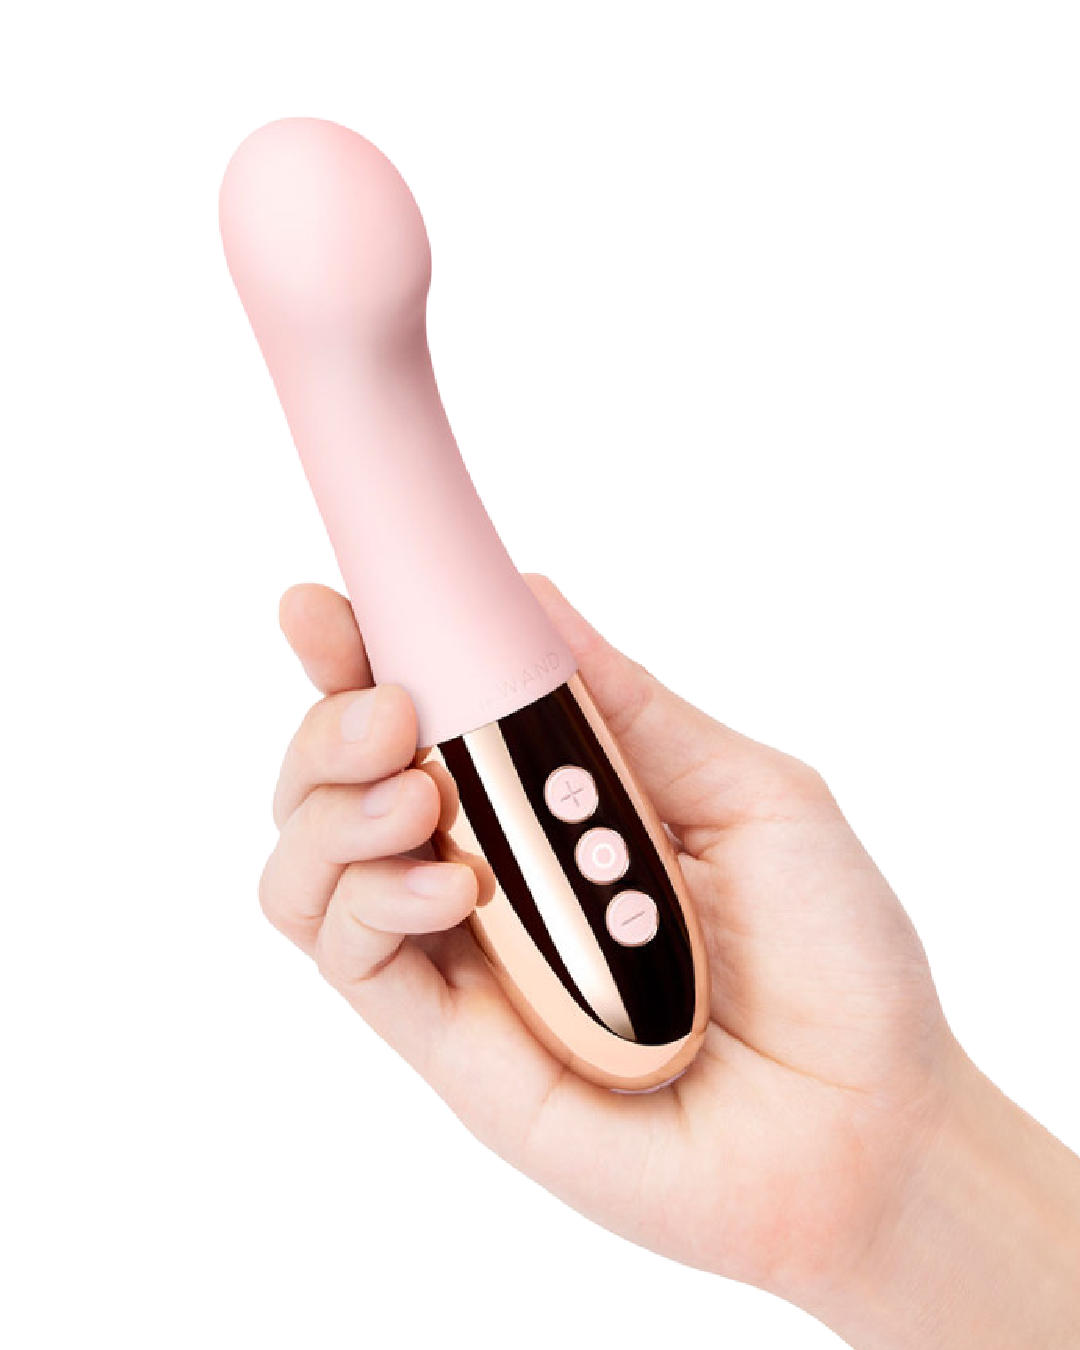 Le Wand Gee Powerful G-Spot Targeting Vibrator - Rose Gold